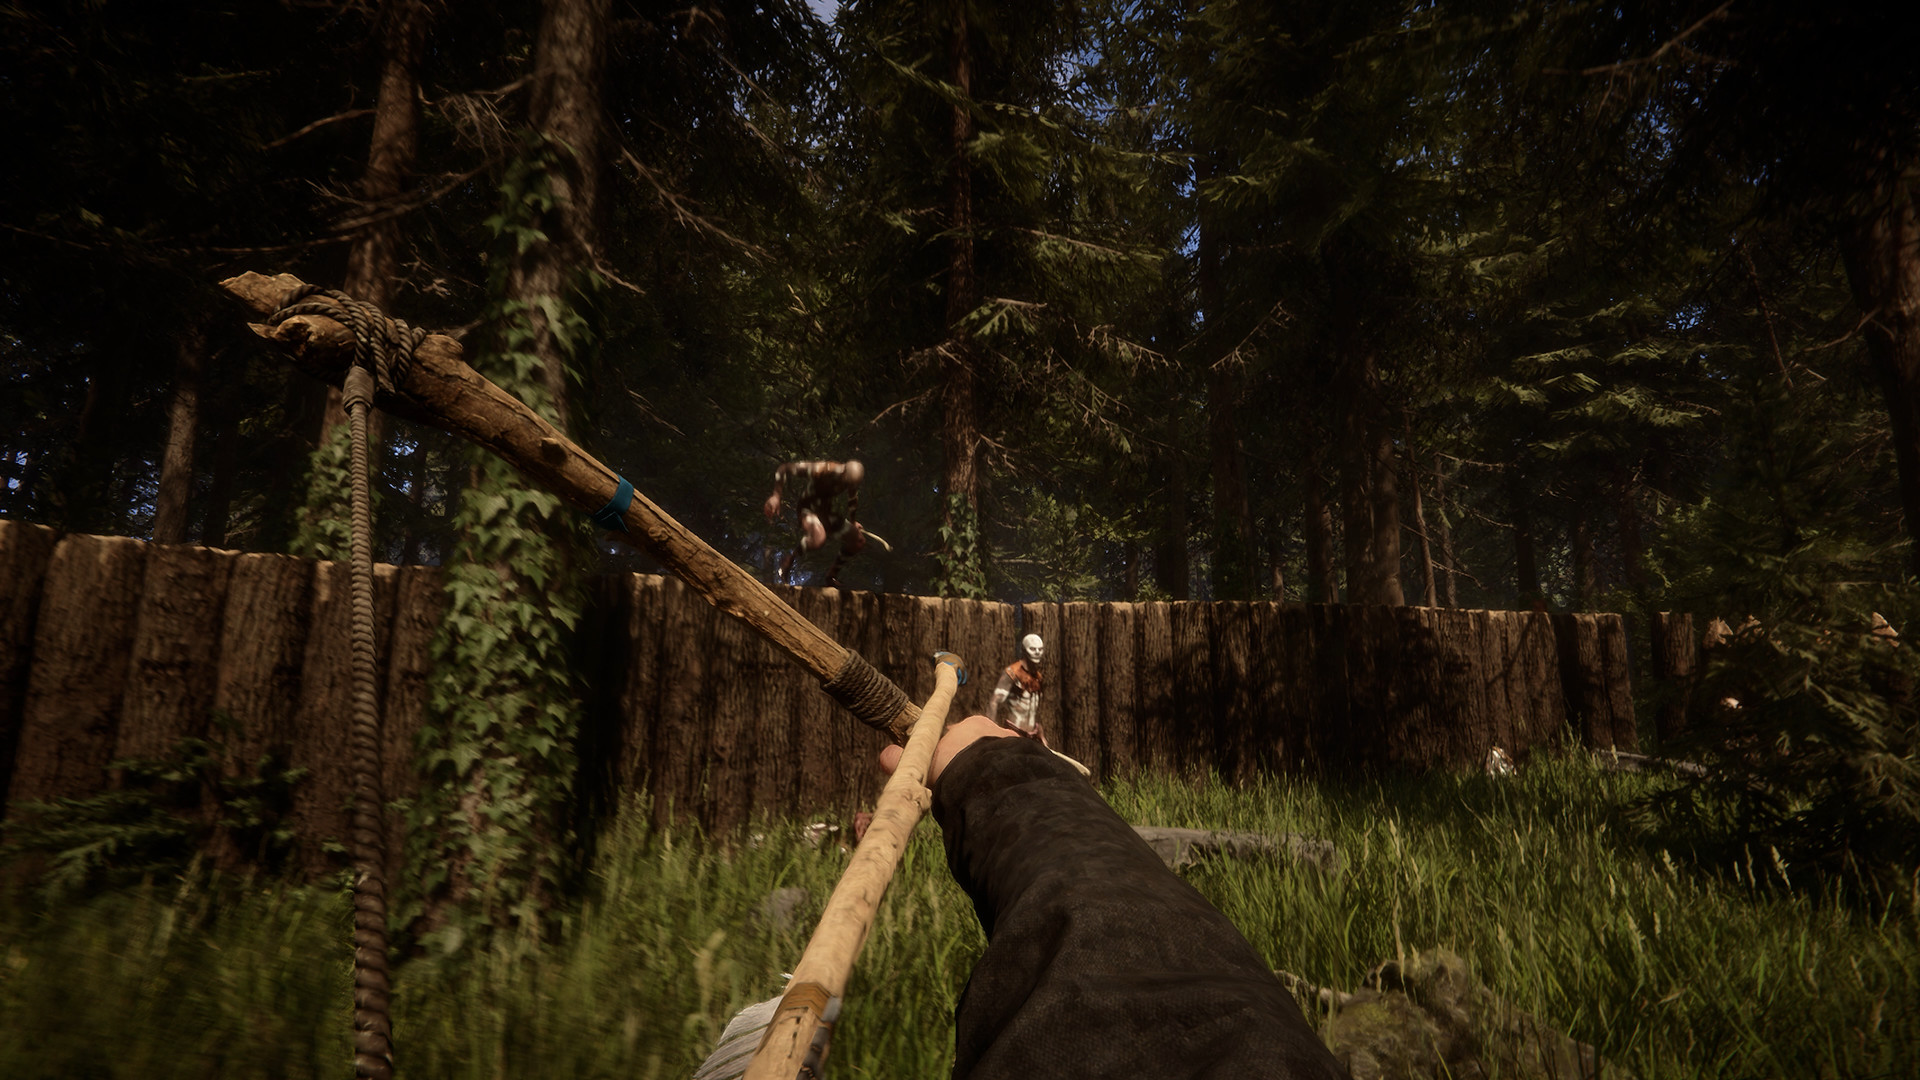 Sons Of The Forest' system requirements for PC